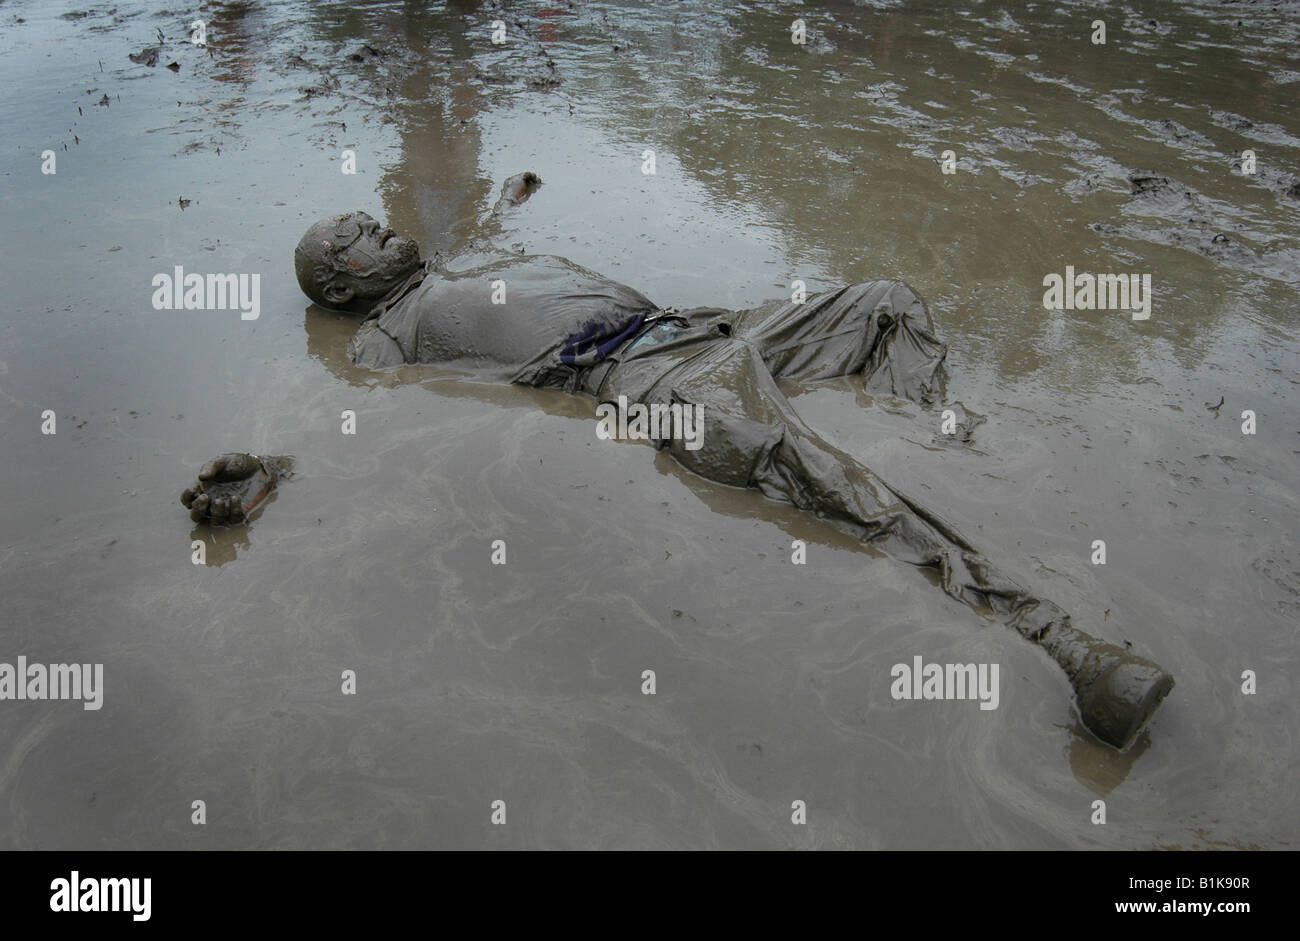 A man lies in a muddy puddle during the glastonbury festival Stock Photo